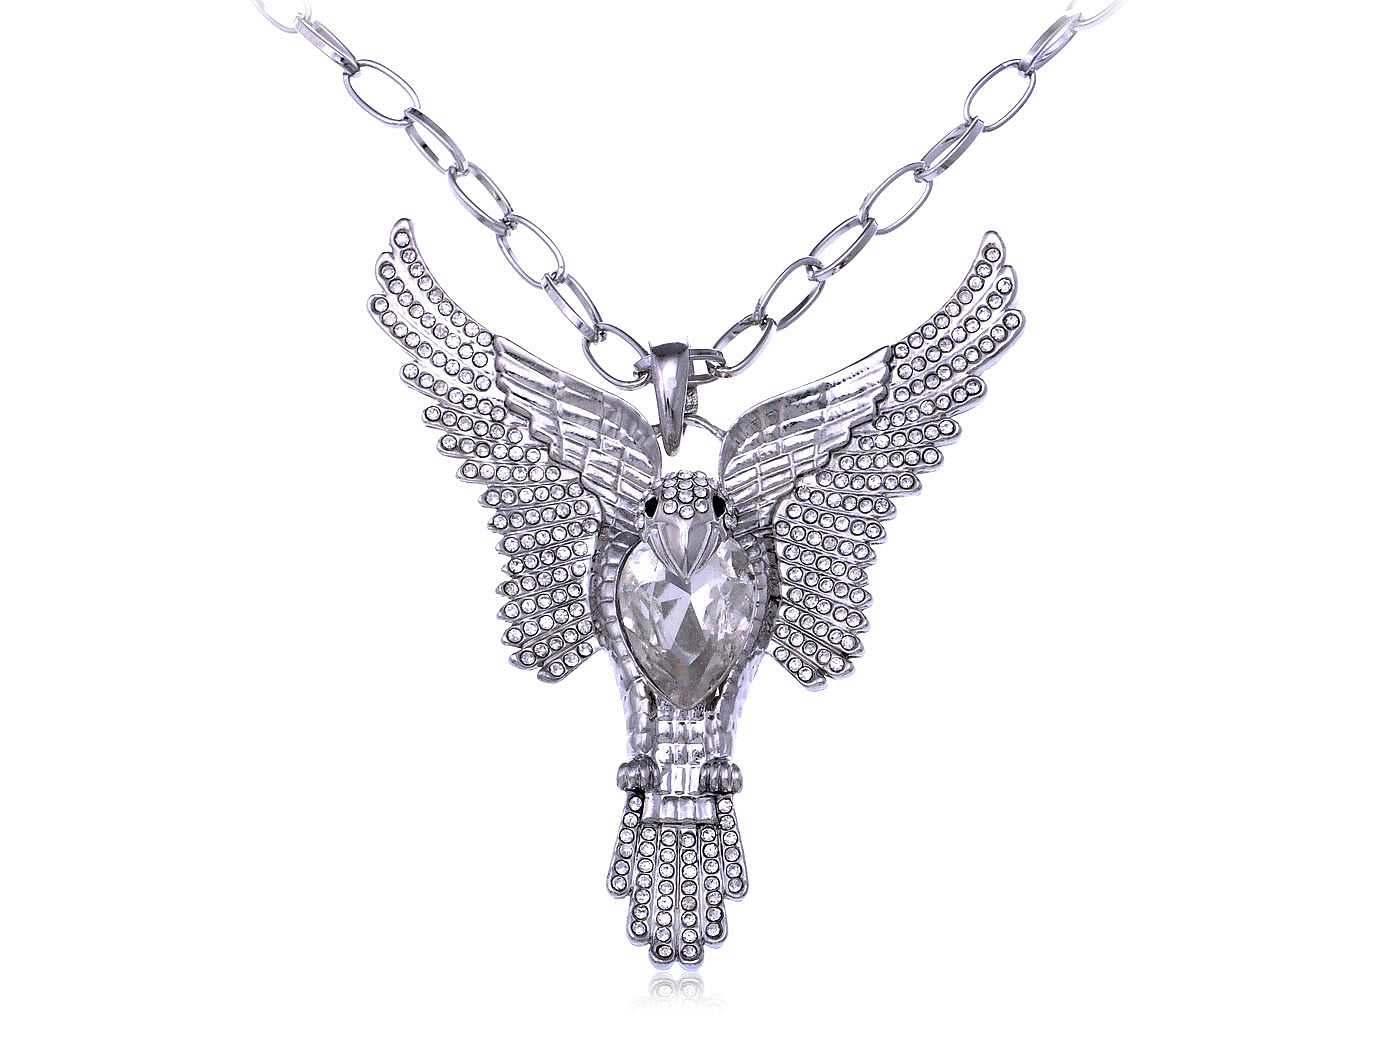 Soaring Eagle Winged Chain Necklace